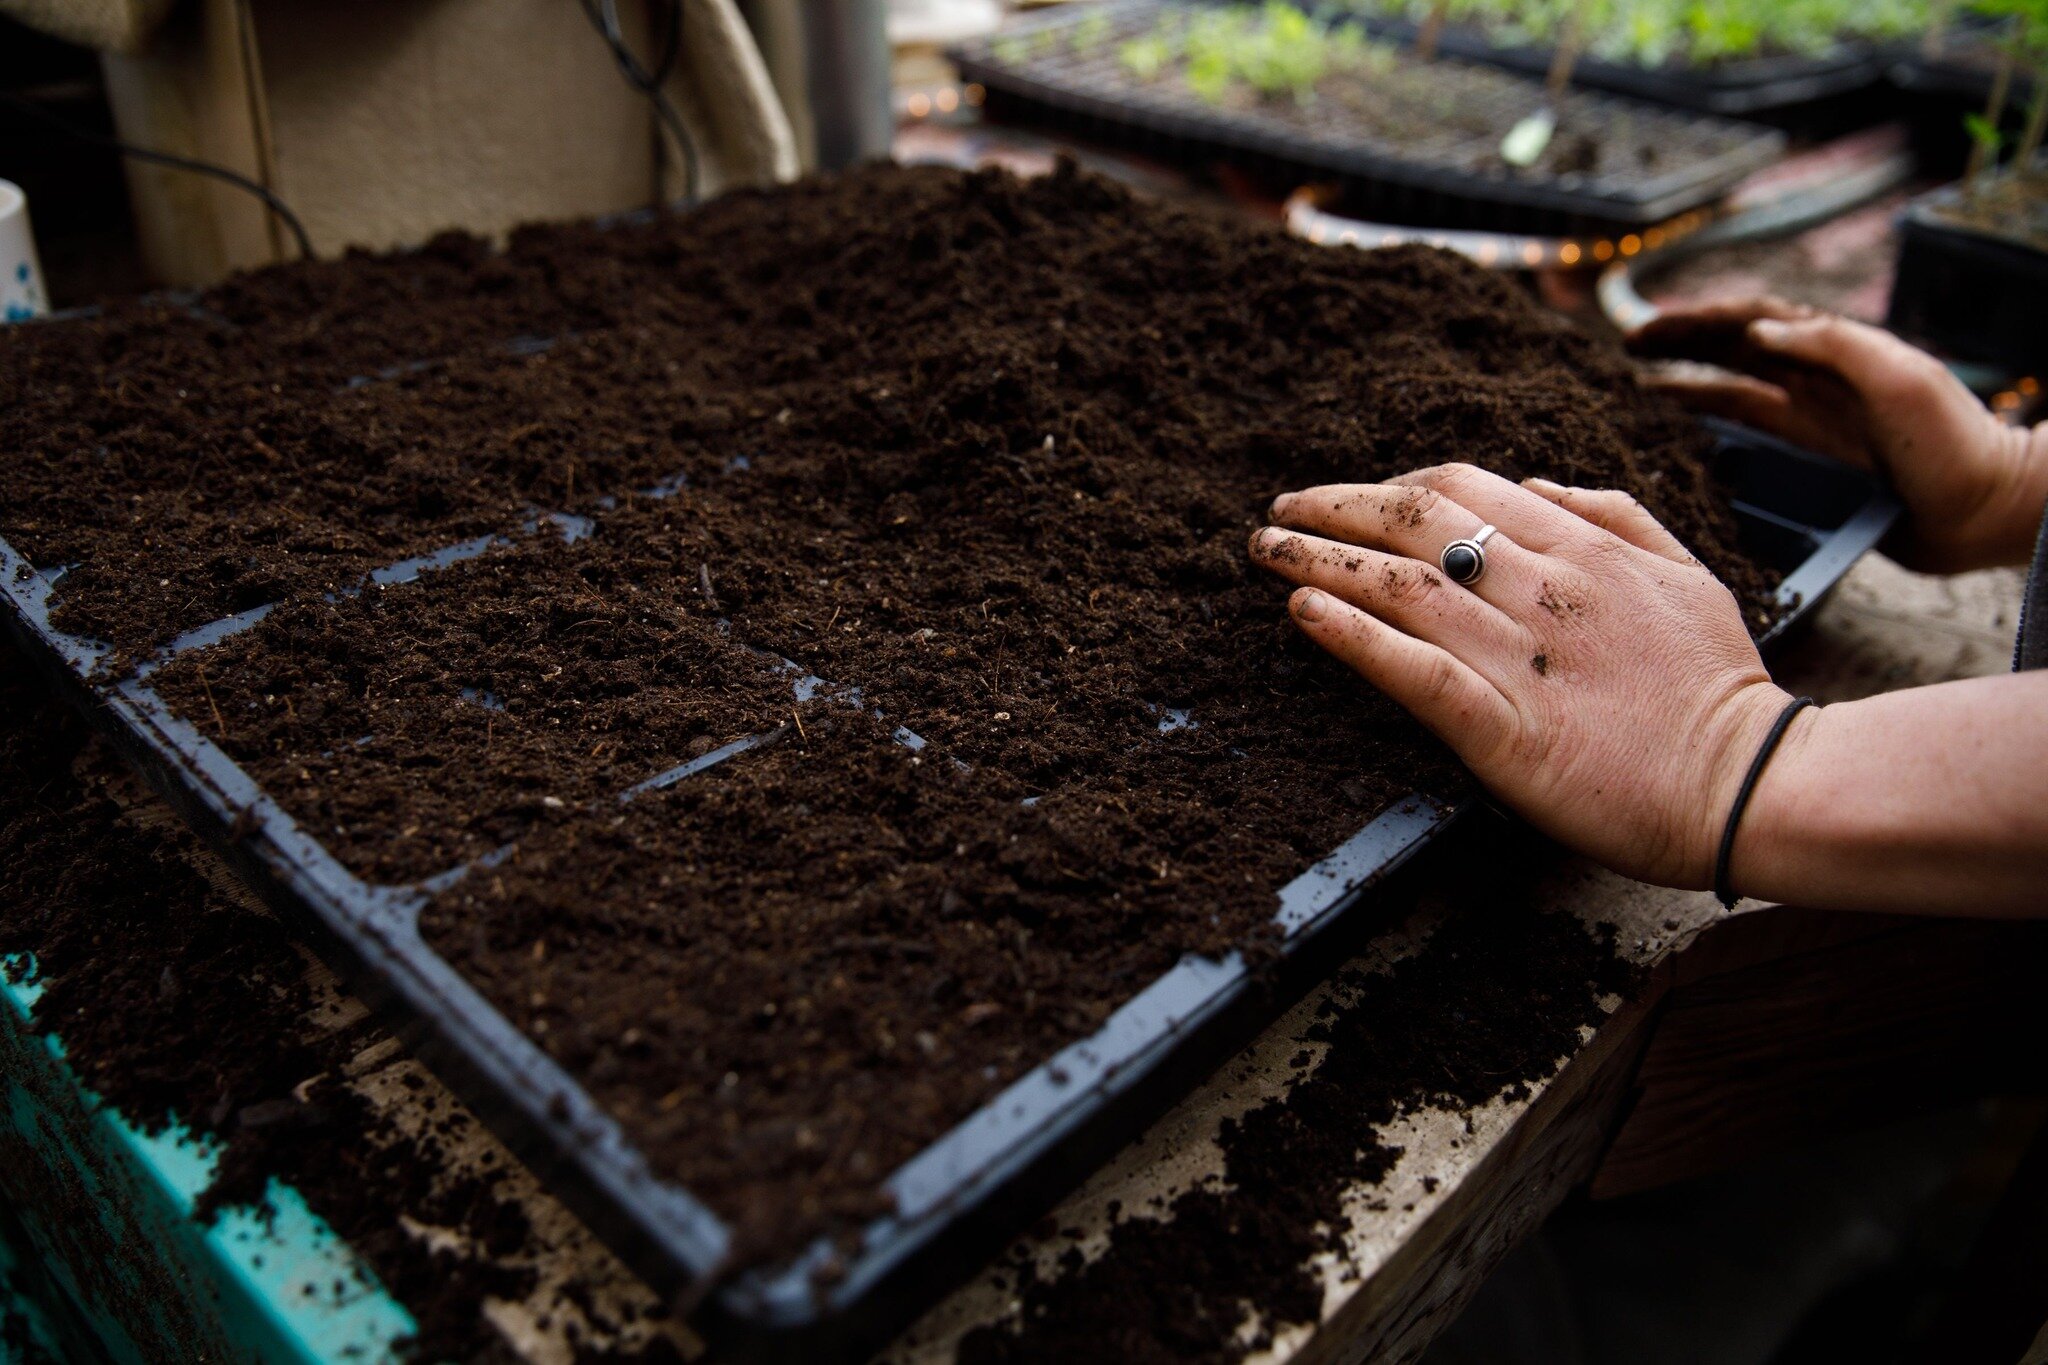 Maine's fifth season, lovingly(?) referred to as Mud Season, is upon us everywhere we go, even in the seedling house! We're very busy seeding, up-potting, and prepping greenhouses for the upcoming growing season! 

Keep an eye out for new products to